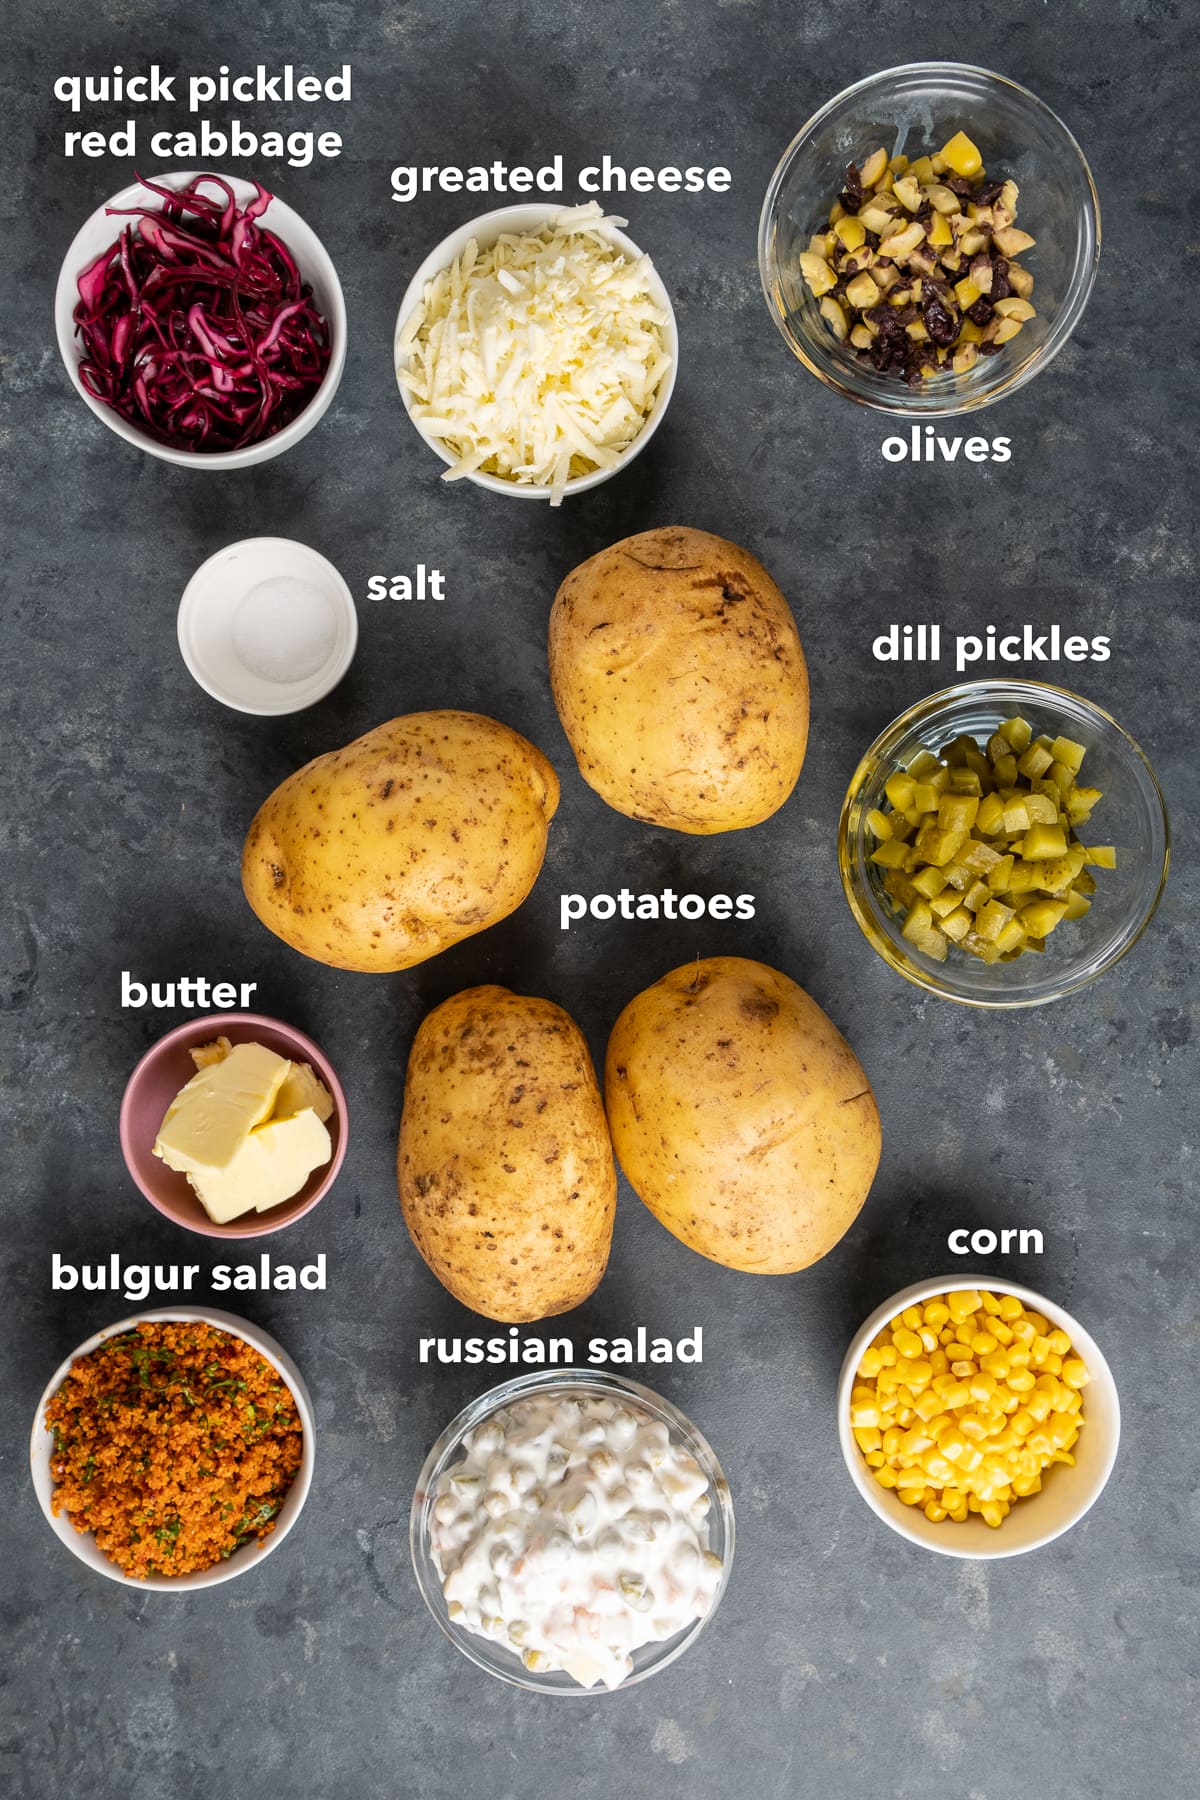 Potatoes, dill pickles, red cabbage, grated cheese, salt, chopped olives, Russian salad, bulgur salad and butter on a dark background.